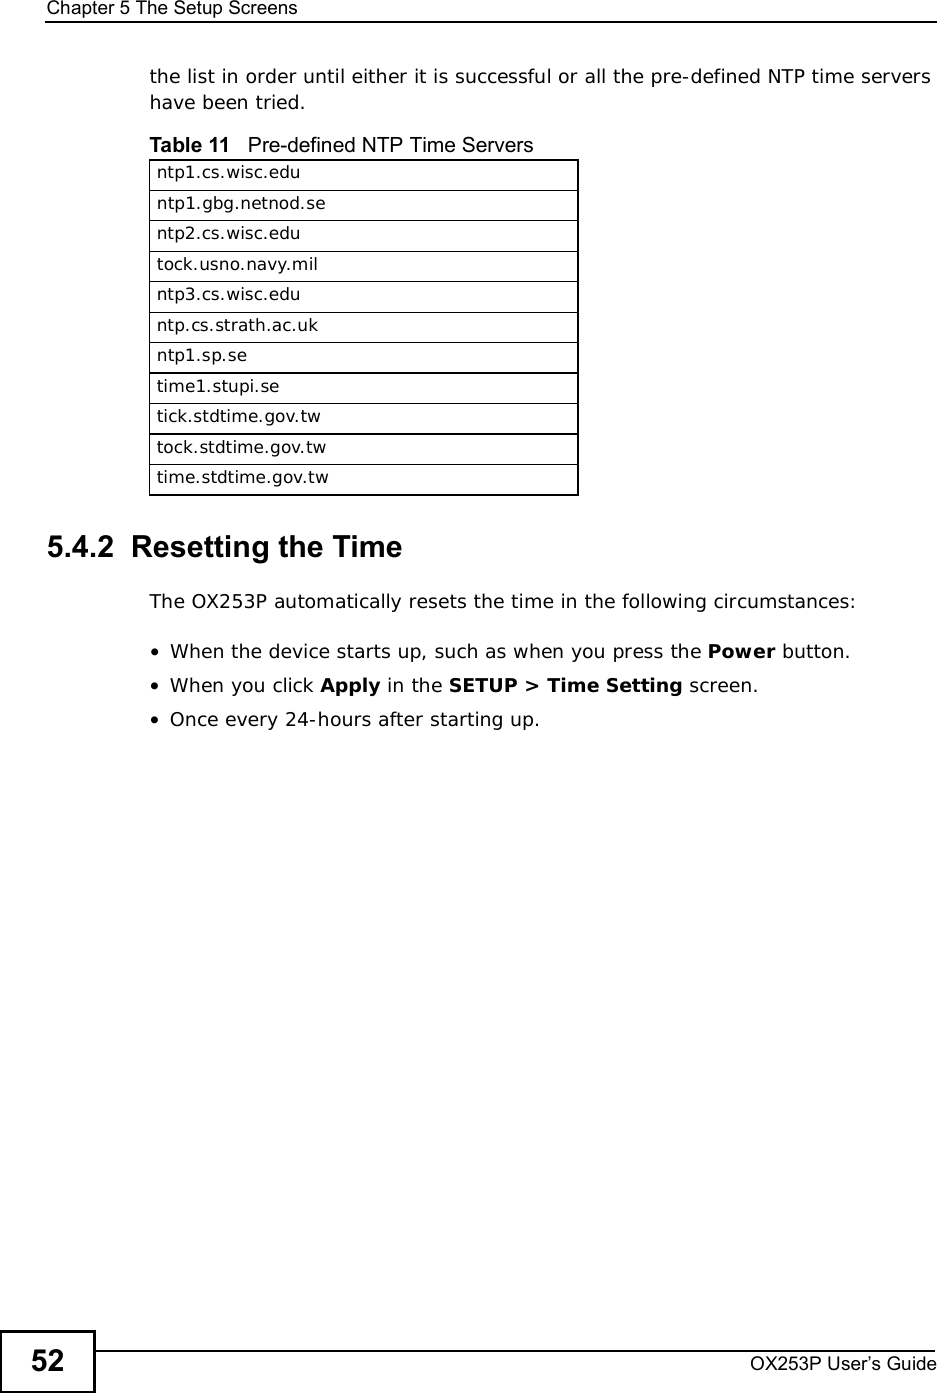 Chapter 5The Setup ScreensOX253P User’s Guide52the list in order until either it is successful or all the pre-defined NTP time servers have been tried. 5.4.2  Resetting the TimeThe OX253P automatically resets the time in the following circumstances:•When the device starts up, such as when you press the Power button.•When you click Apply in the SETUP &gt; Time Setting screen.•Once every 24-hours after starting up.Table 11   Pre-defined NTP Time Serversntp1.cs.wisc.eduntp1.gbg.netnod.sentp2.cs.wisc.edutock.usno.navy.milntp3.cs.wisc.eduntp.cs.strath.ac.ukntp1.sp.setime1.stupi.setick.stdtime.gov.twtock.stdtime.gov.twtime.stdtime.gov.tw